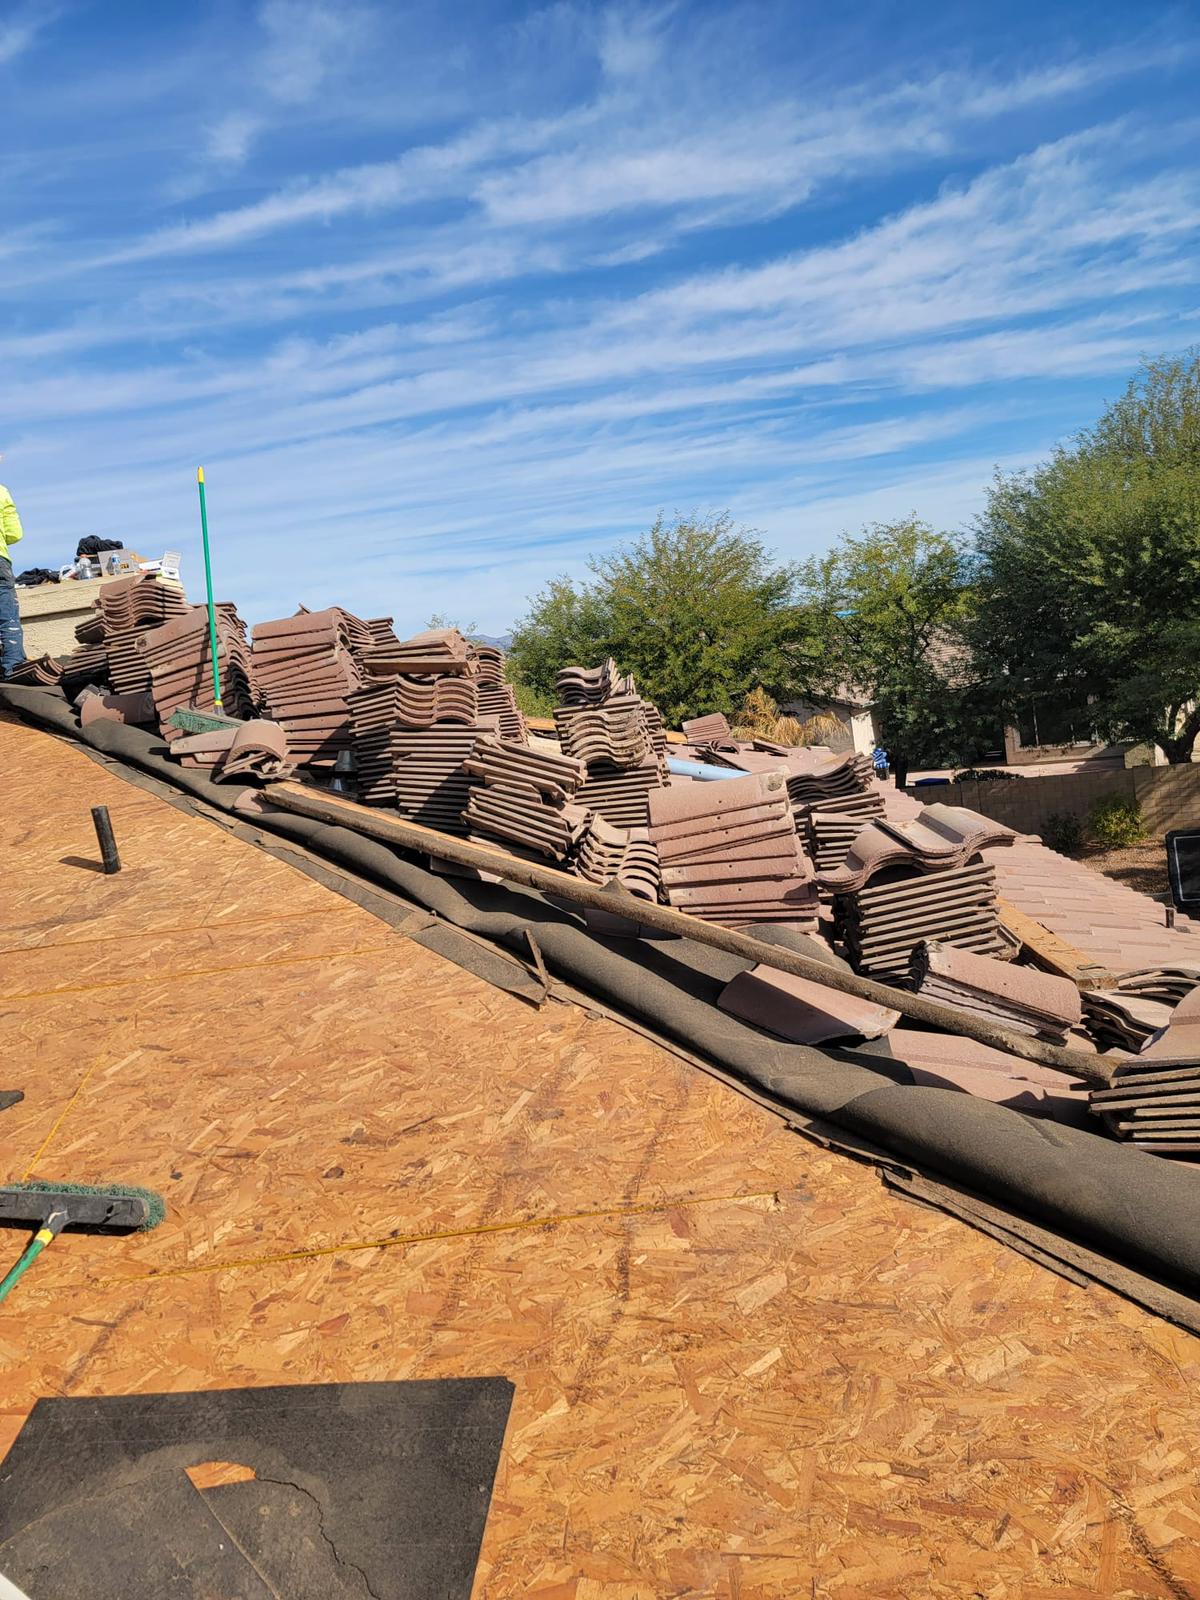 Roofing materials prepped by Behmer for a comprehensive tile re-felting in Silverleaf, Scottsdale.